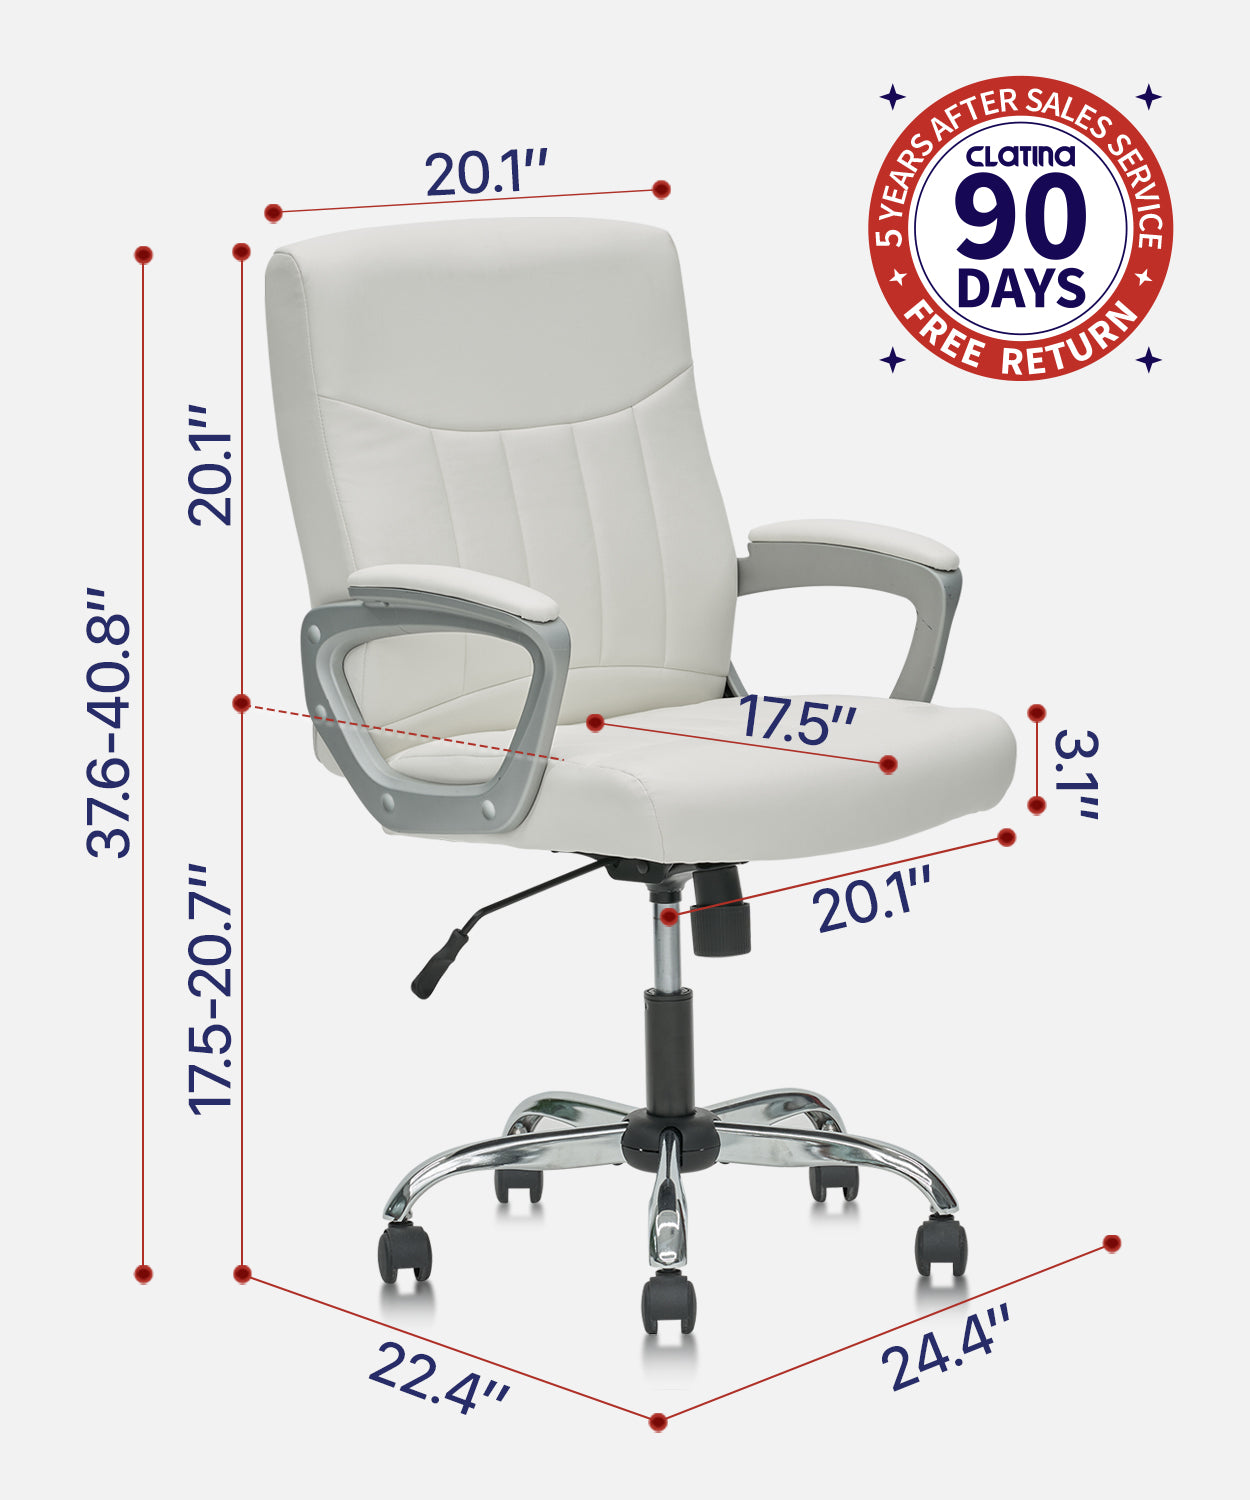 Mid Back Padded Office Chair